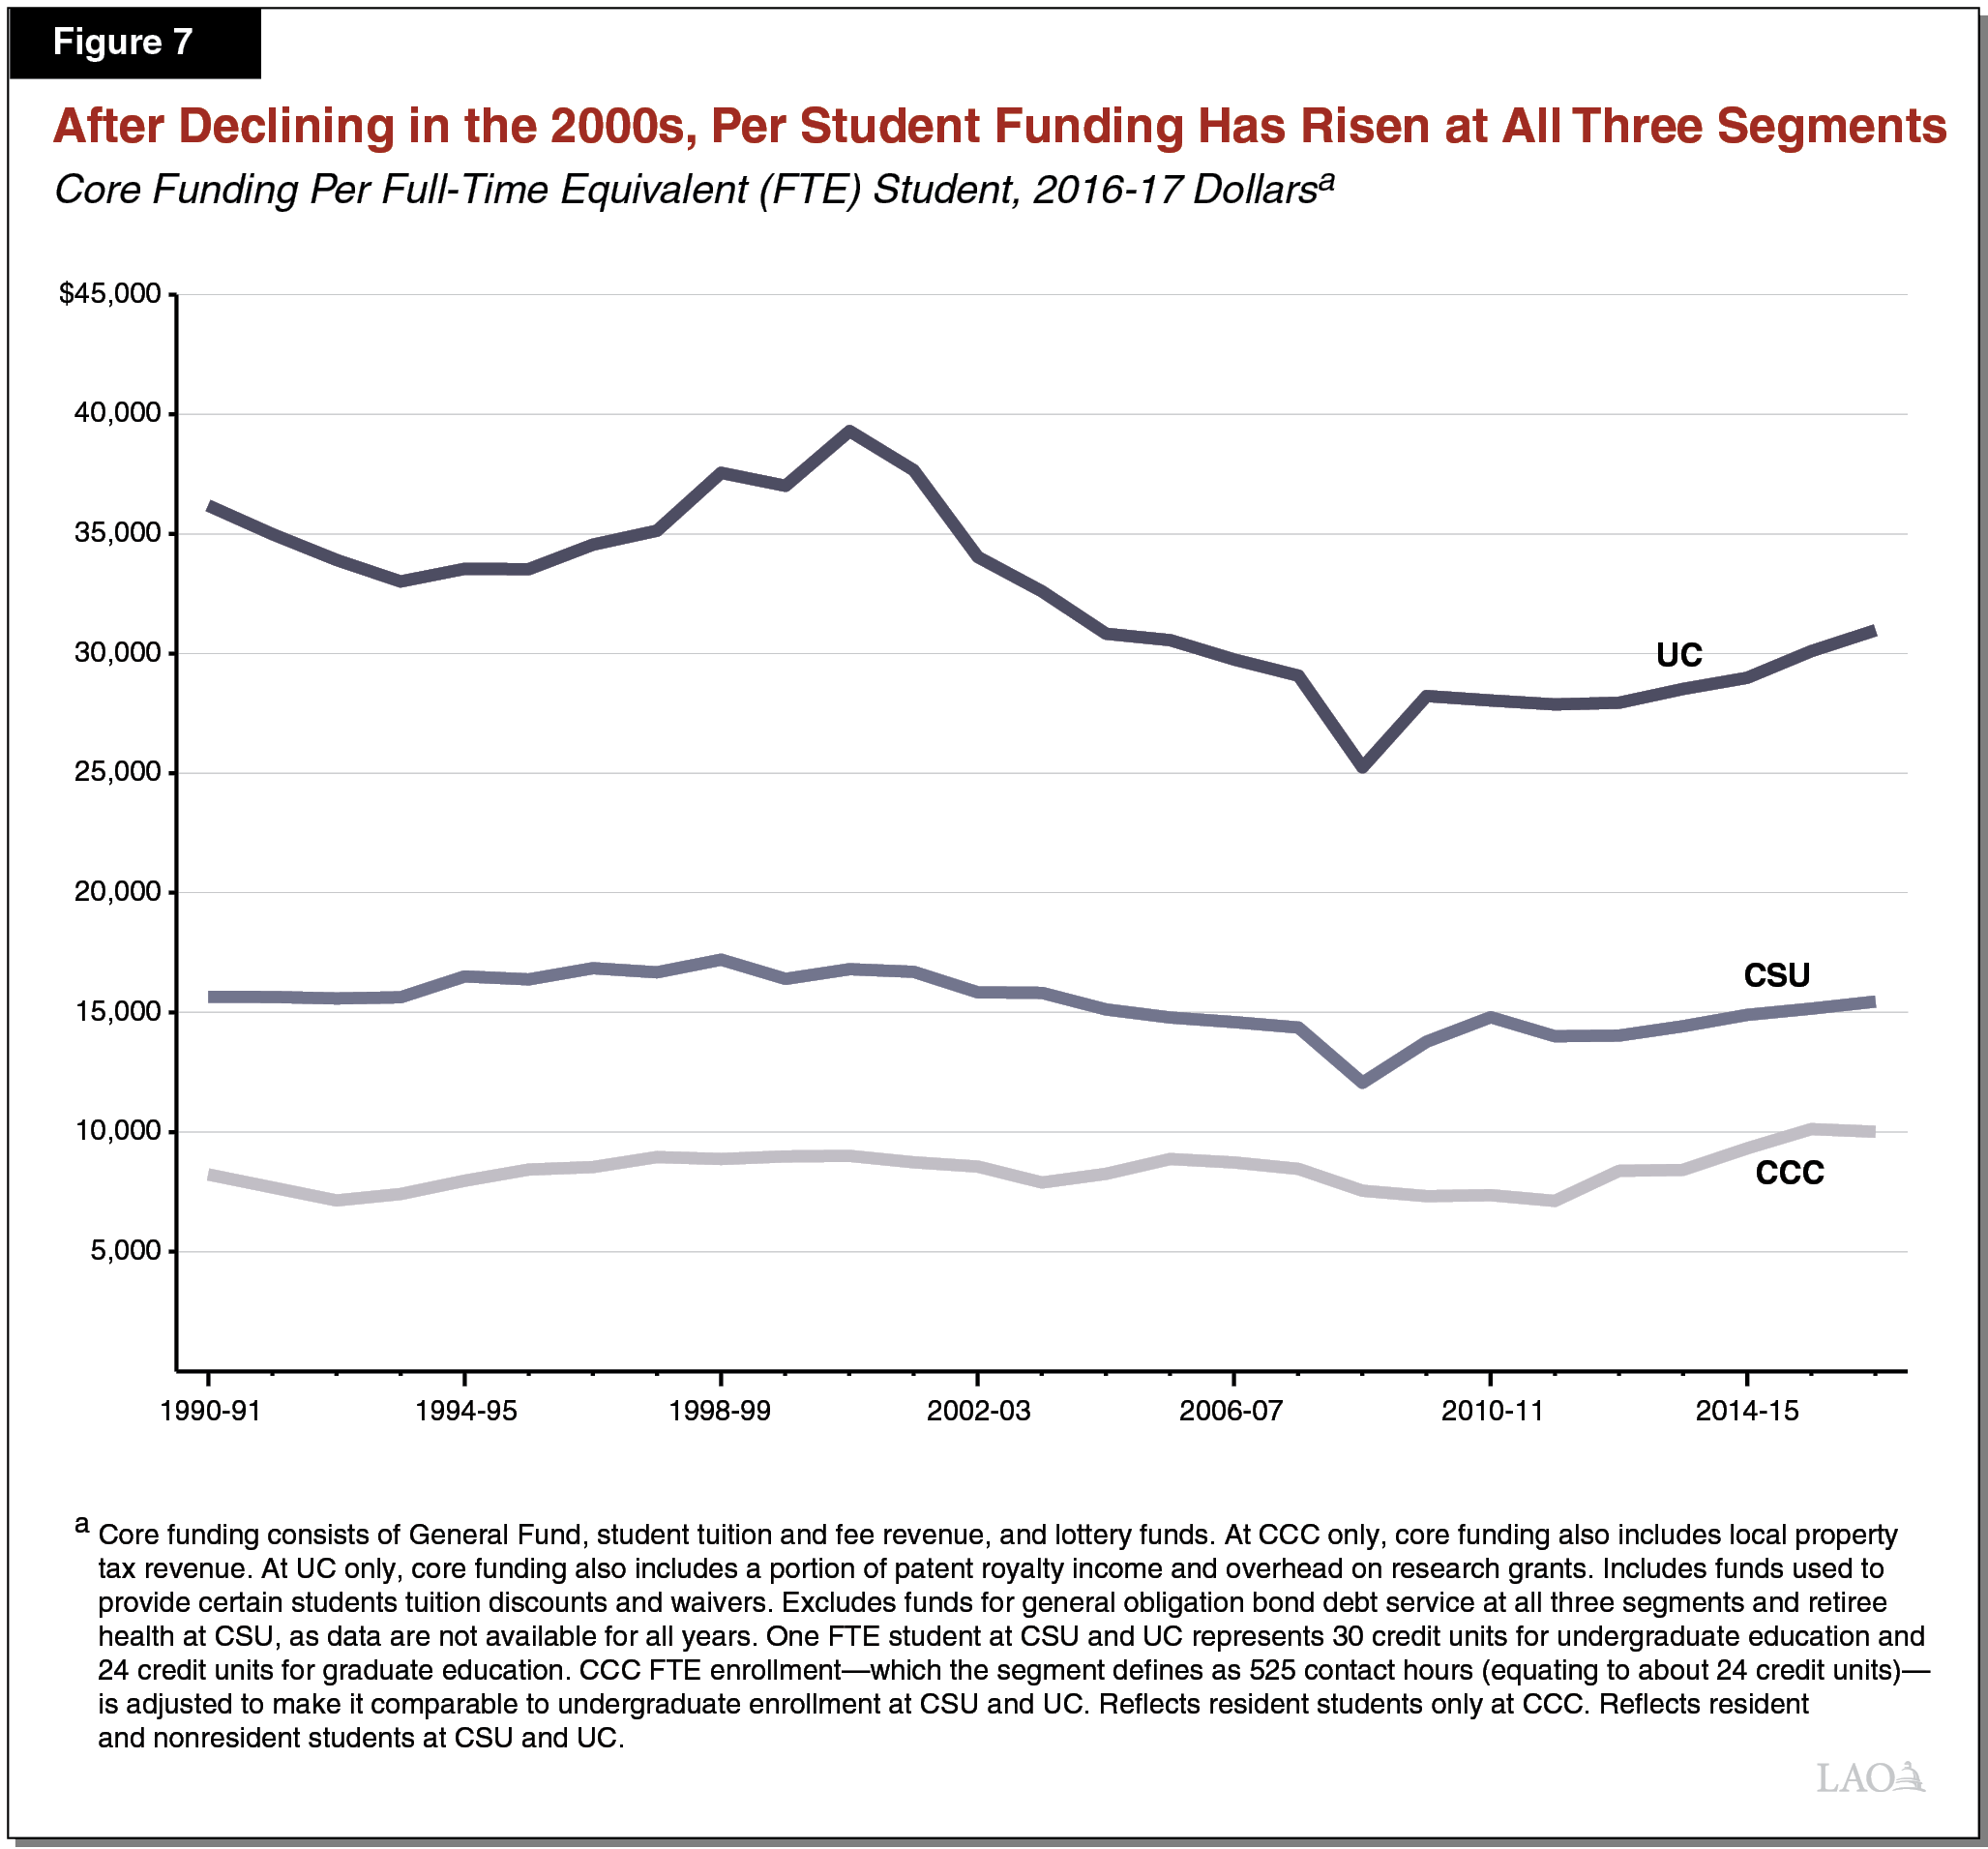 Figure 7 - After Declining in the 2000s, Per Student Funding Has Risen at All Three Segments